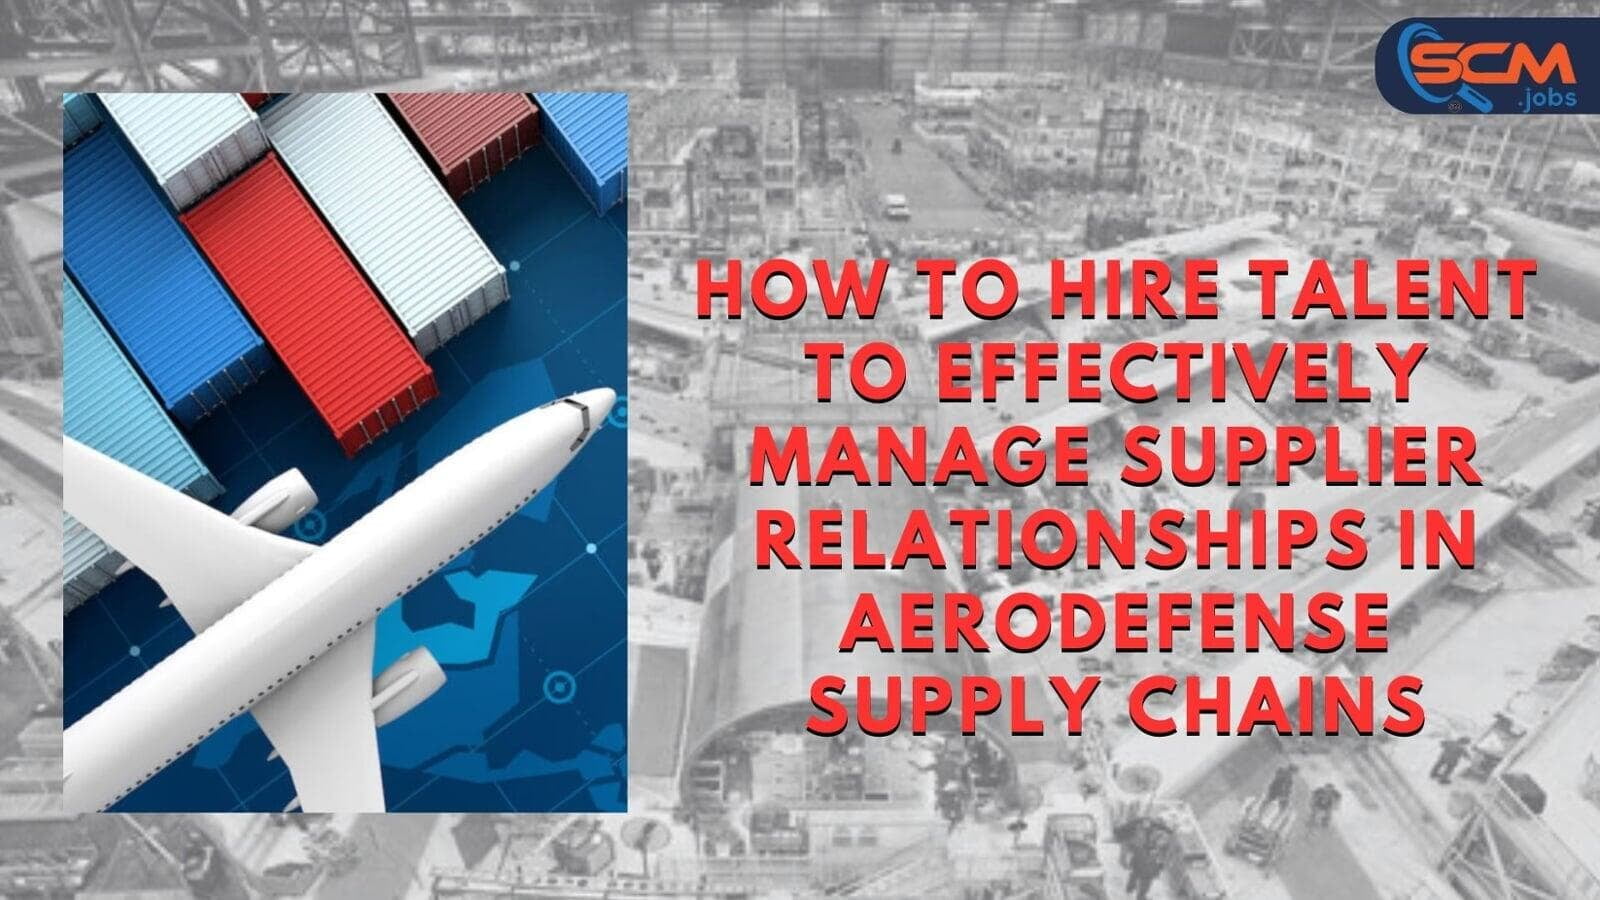 How to Hire Talent To Effectively Manage Supplier Relationships in Aerodefense Supply Chains